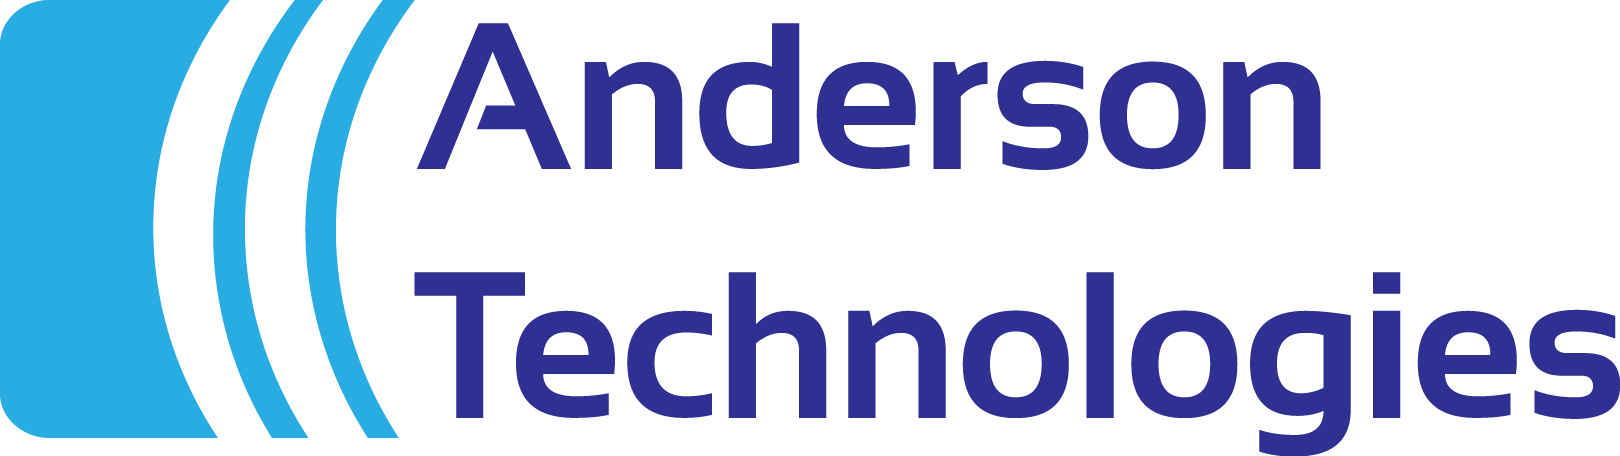 Anderson Technologies